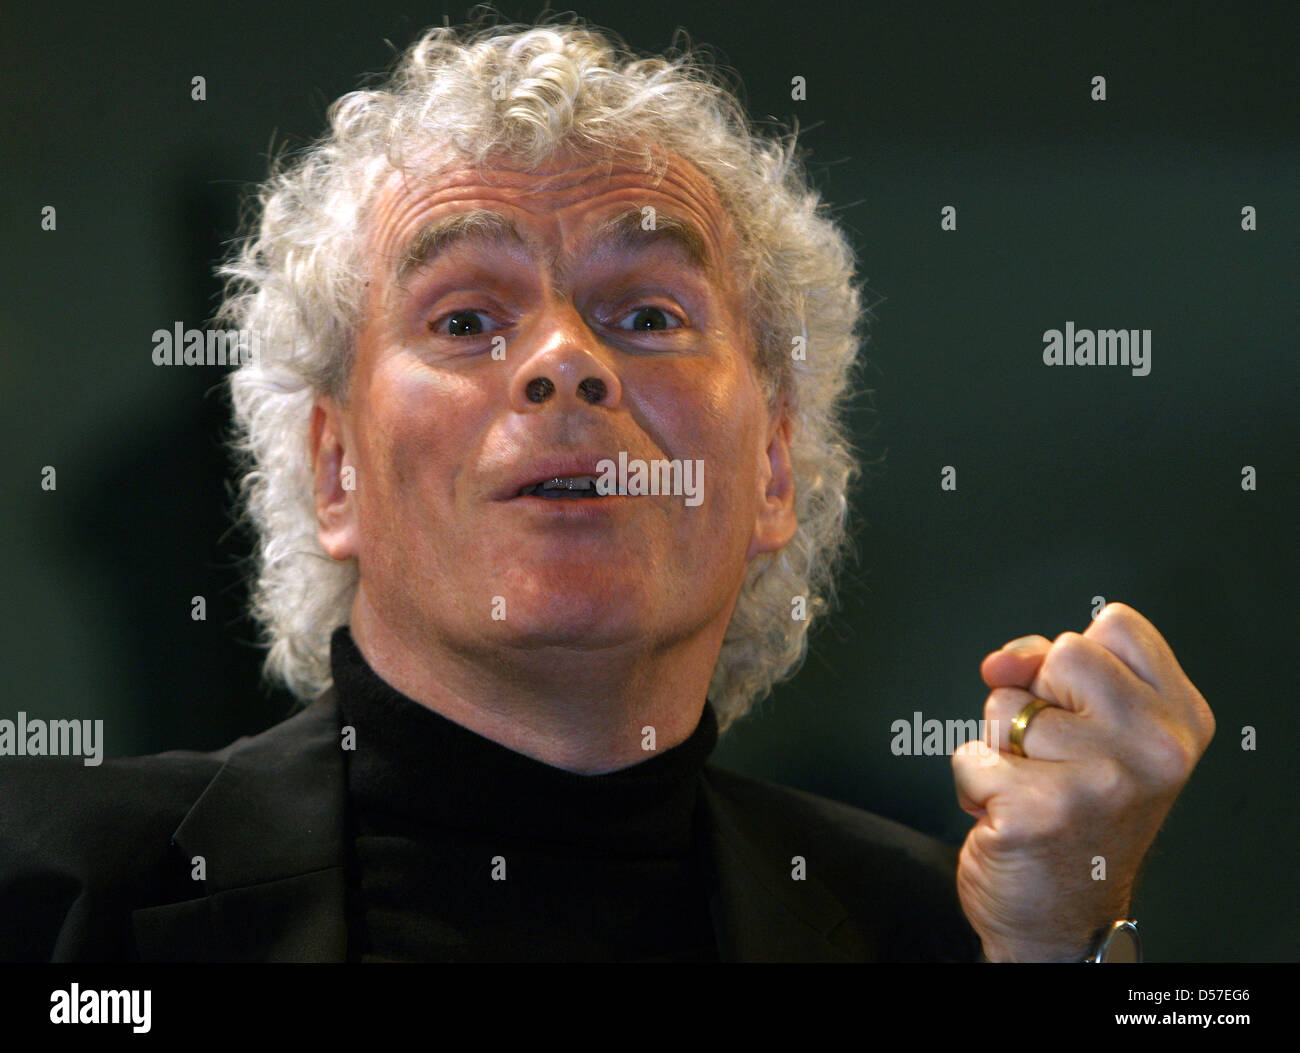 Chief conductor of the Berlin Philharmonic Orchestra, Sir Simon Rattle, speaks at a press conference in Berlin, Germany, 12 May 2010. Rattle attended the philharmonic orchestra's annual press conference. Photo: STEPHANIE PILICK Stock Photo